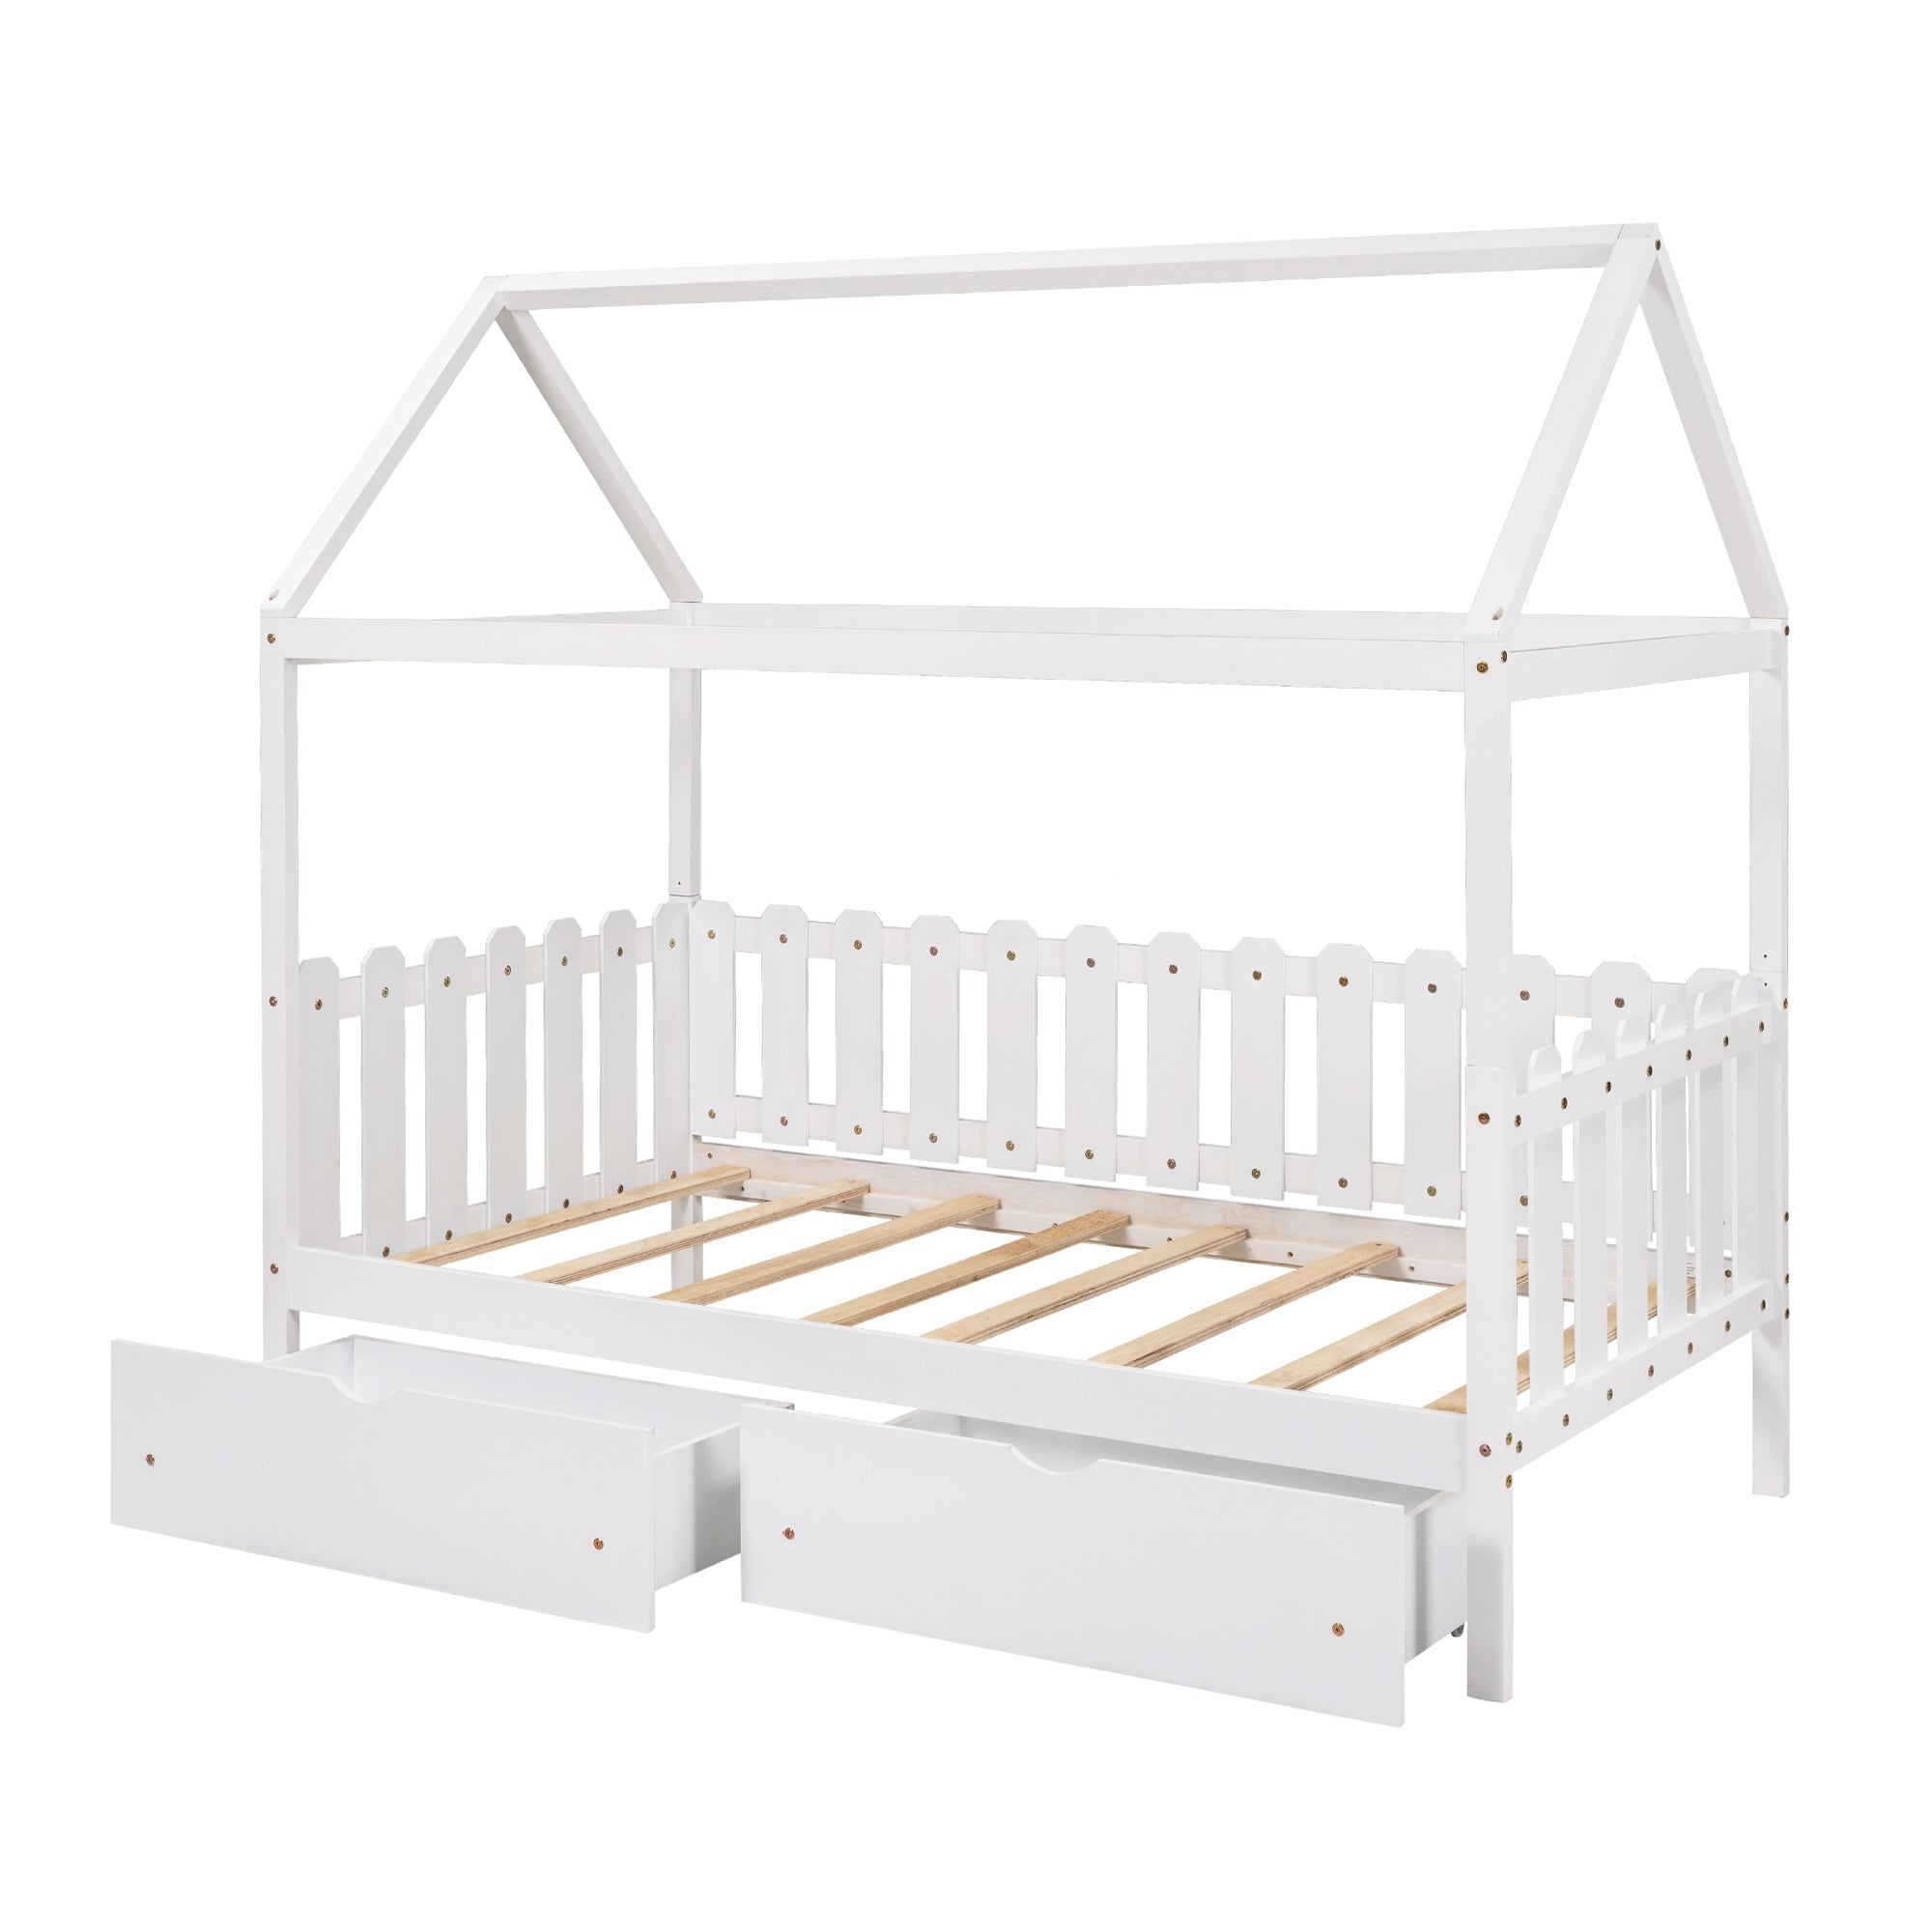 Euroco Twin Size Wood House-Shaped Bed with Drawers for Kids, White